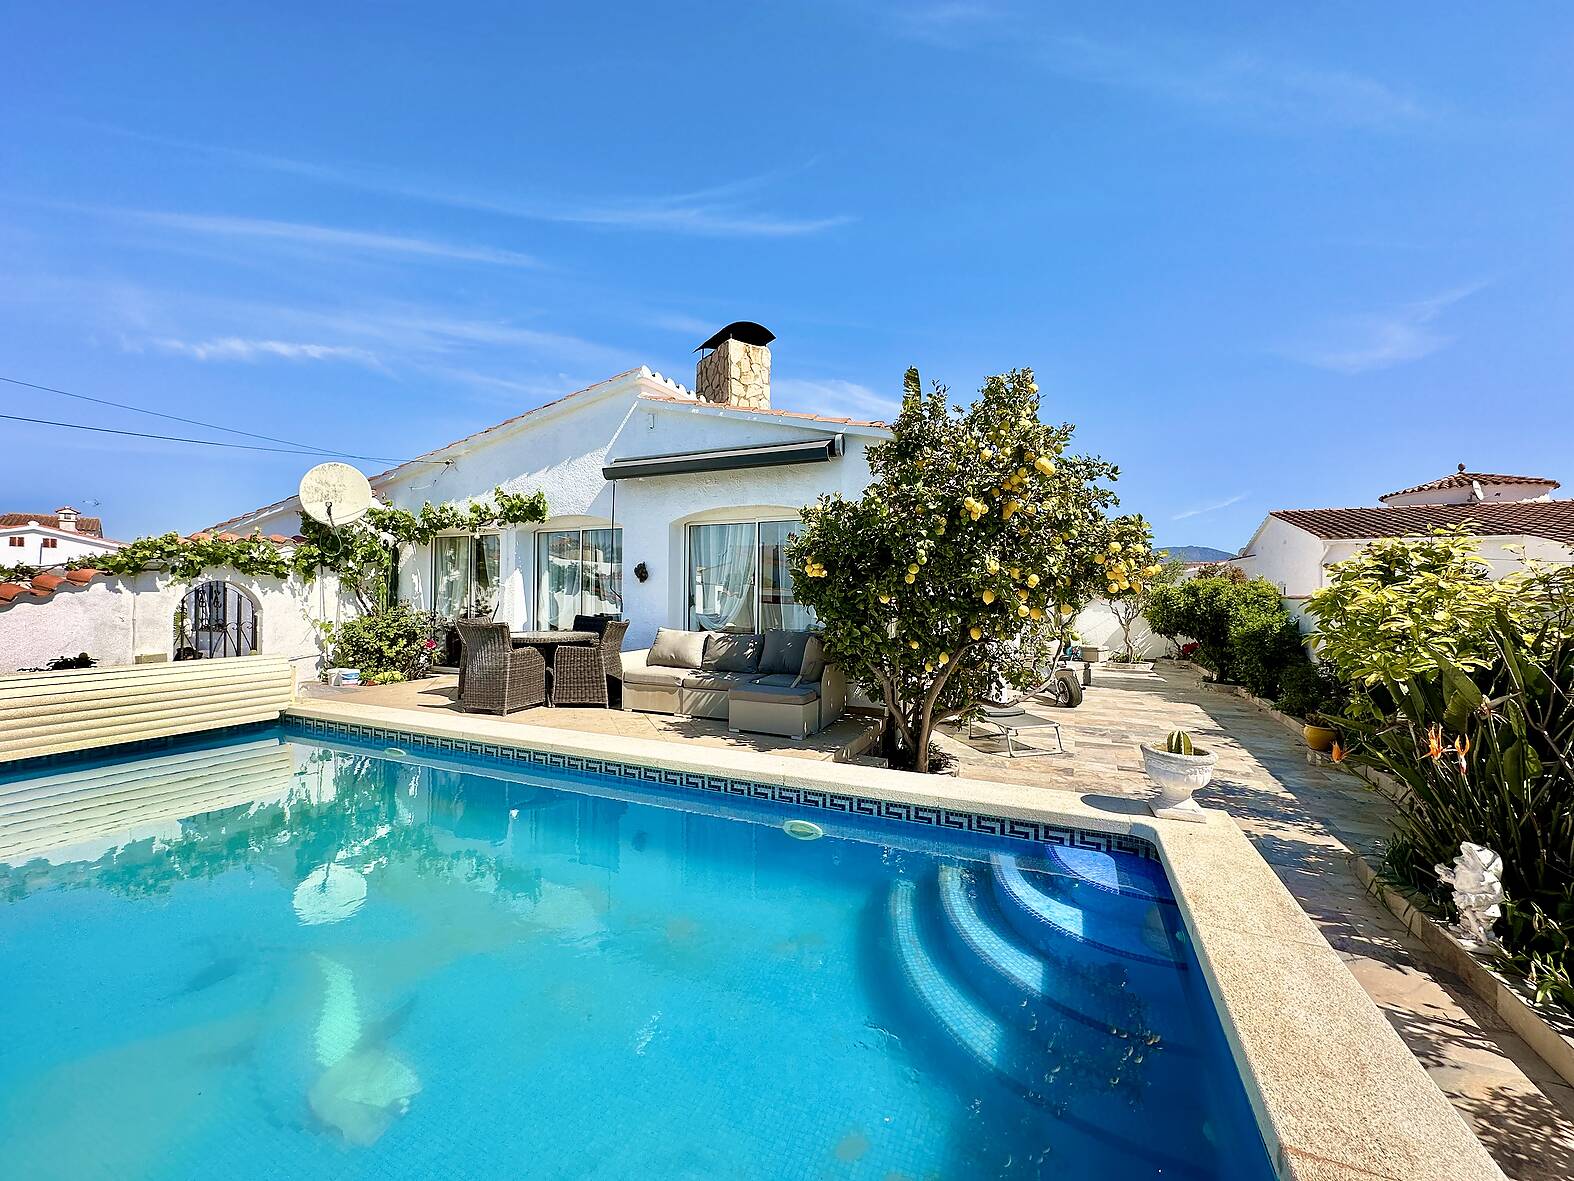 Splendid house with swimming pool for sale in Empuriabrava